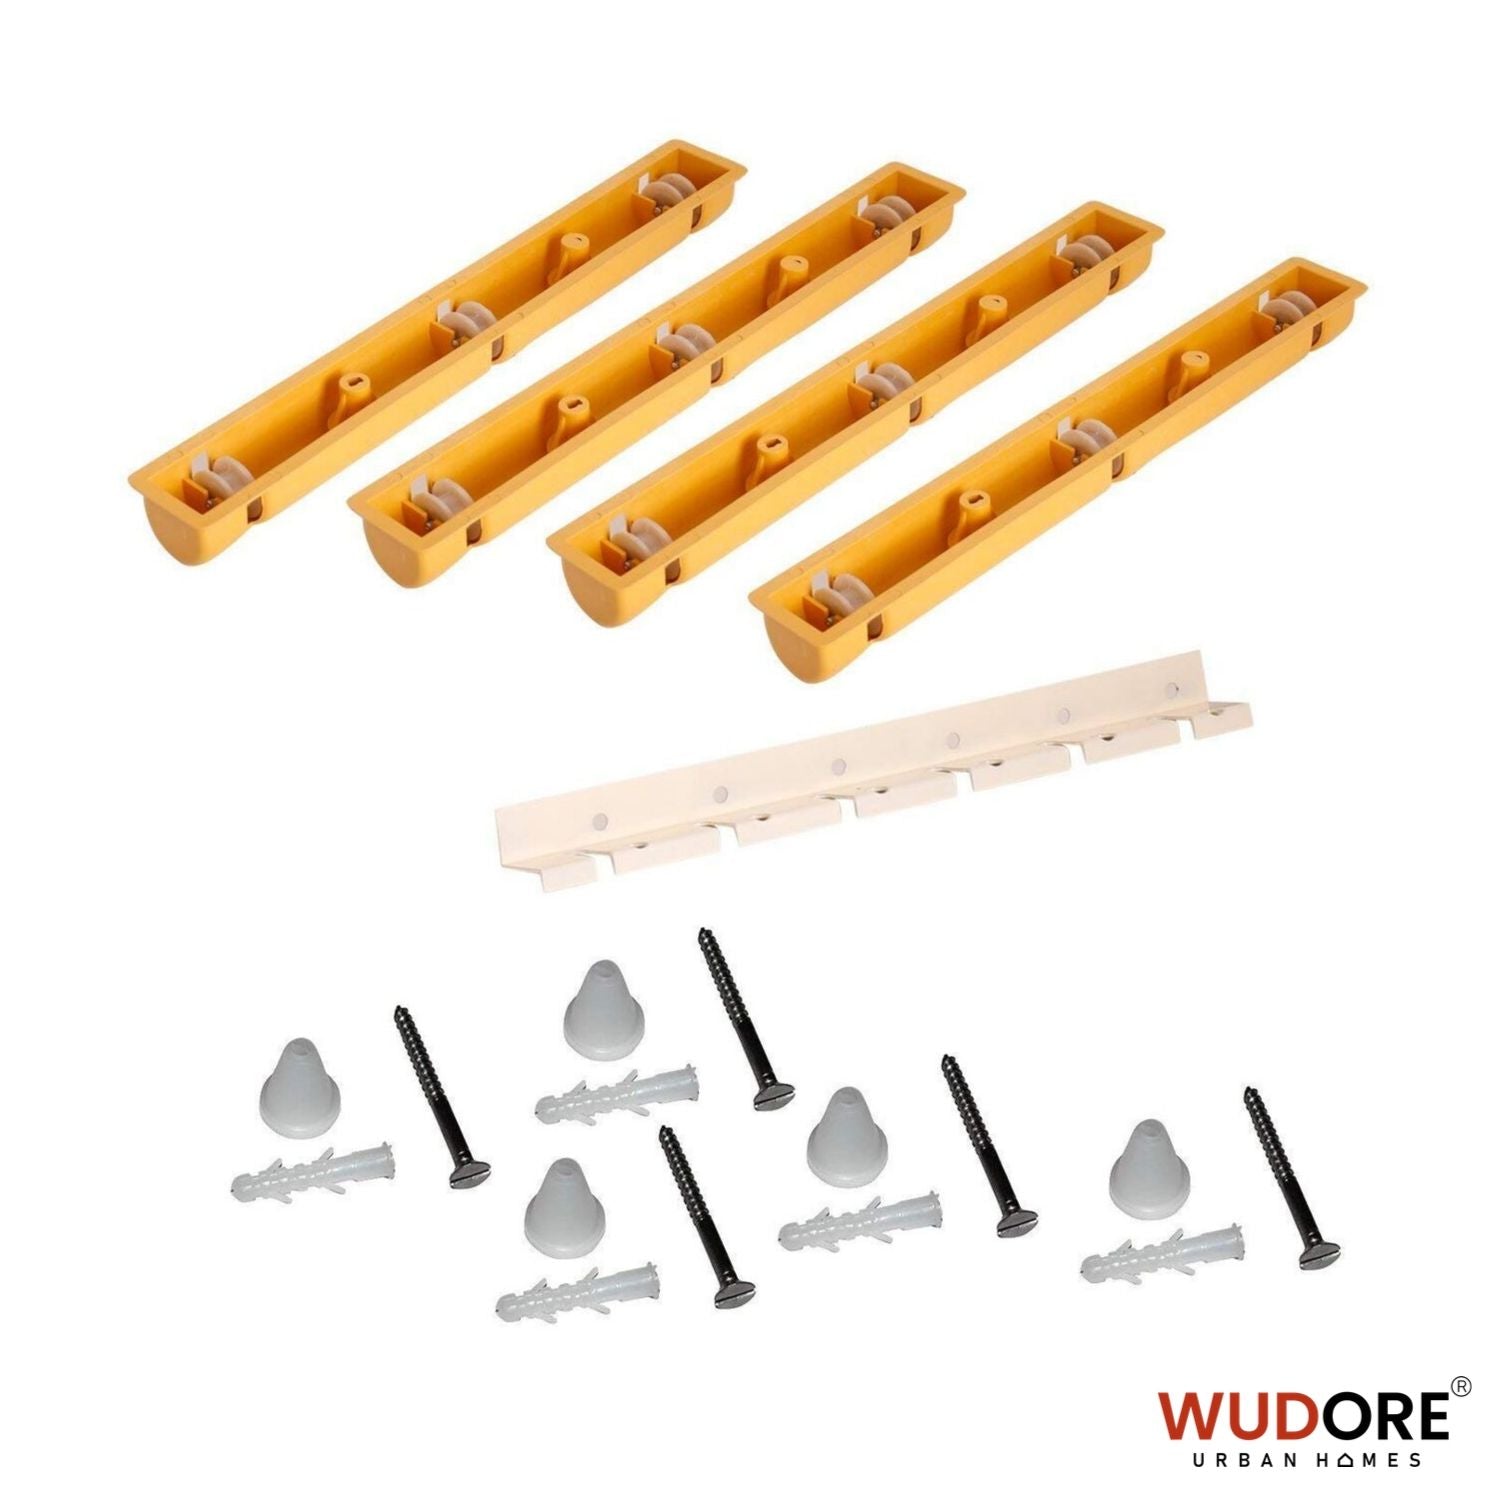 Ceiling cloth hanger spare parts from Wudore.com